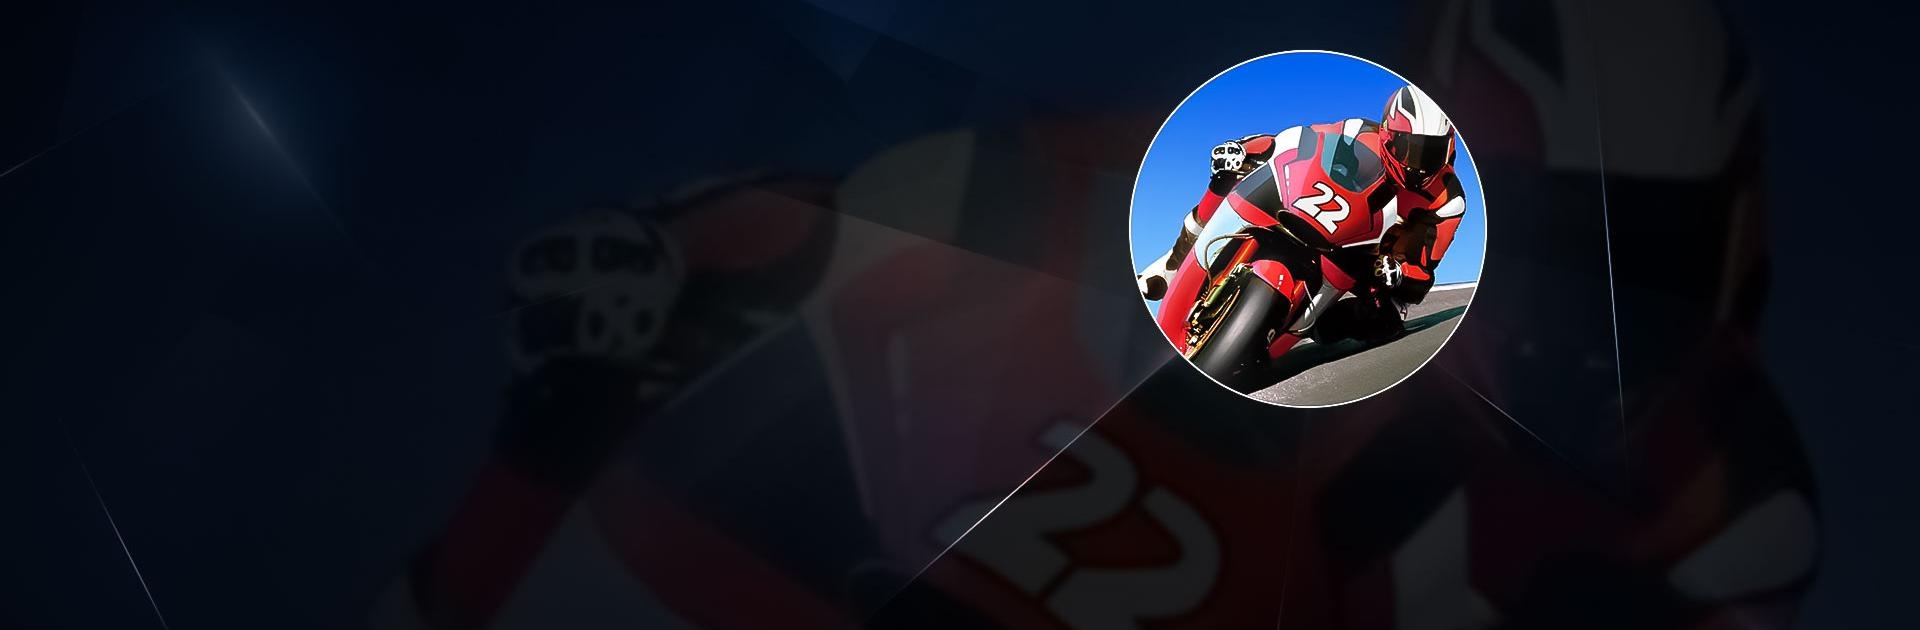 Play GT Bike Racing- Moto Bike Game Online for Free on PC & Mobile